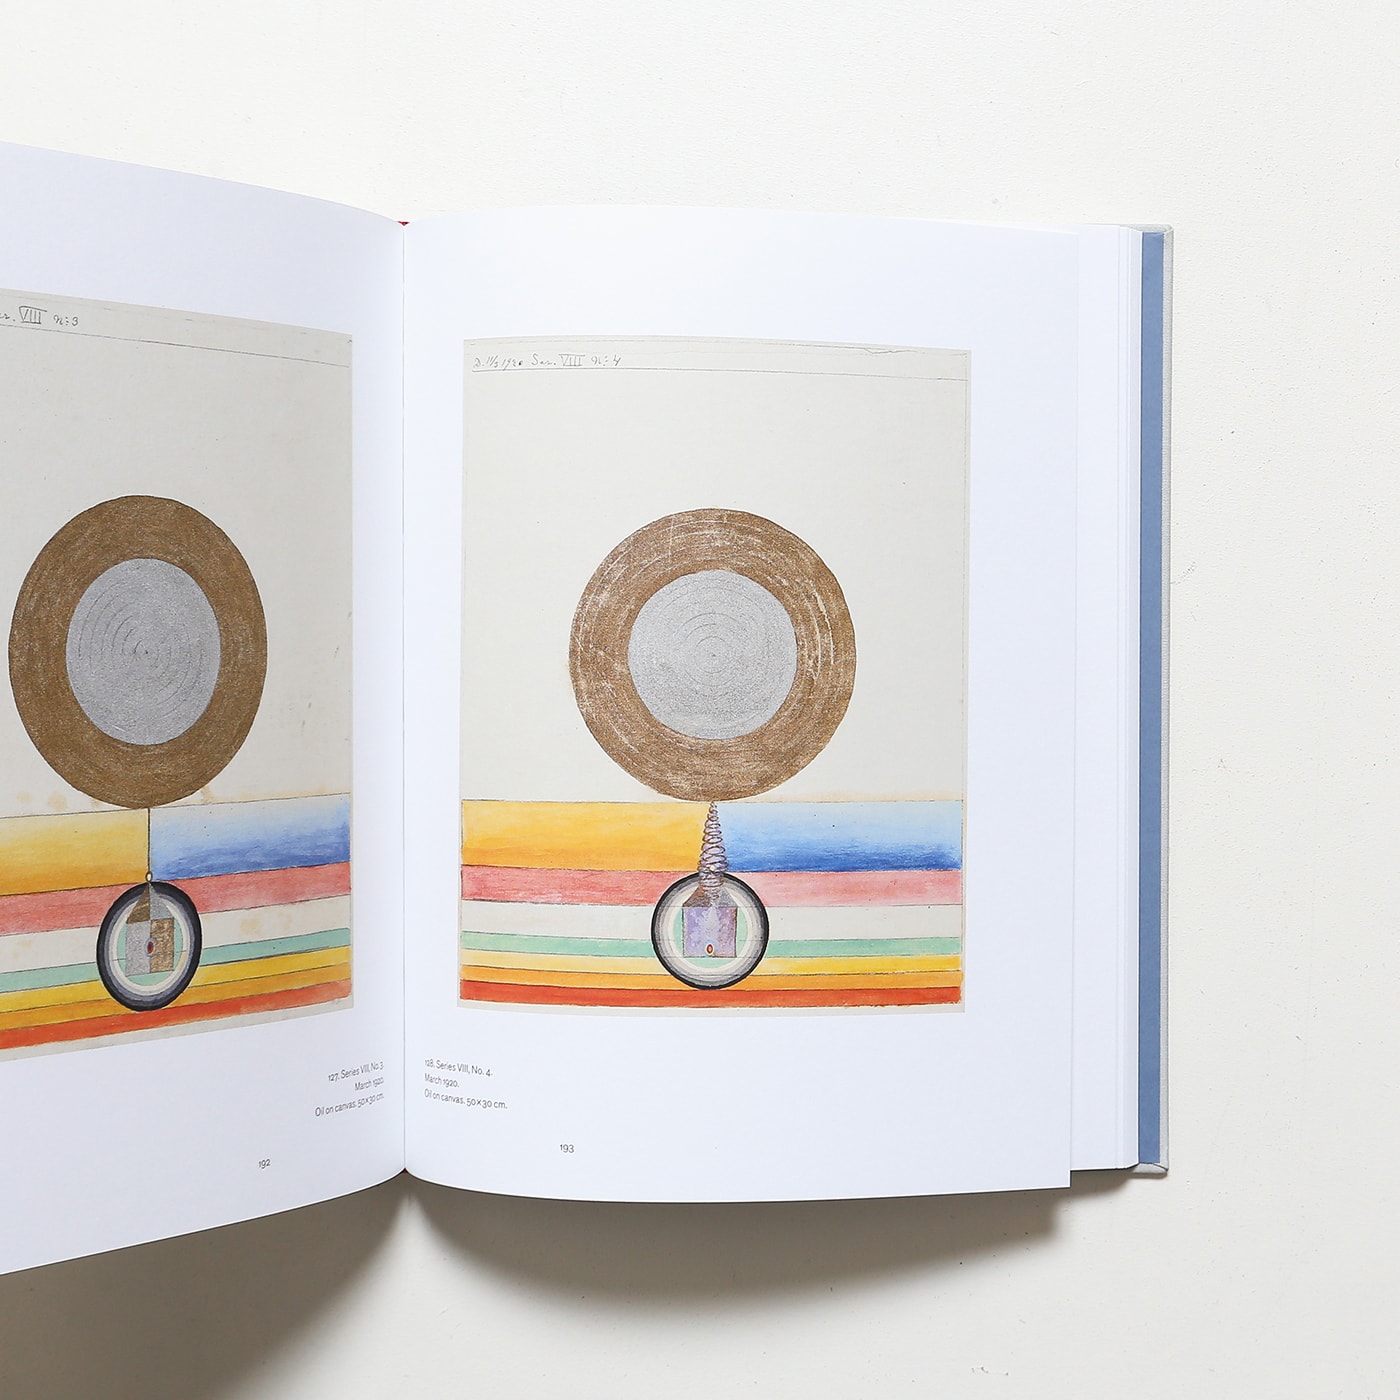 Hilma Af Klint: Occult Painter and Abstract Pioneer